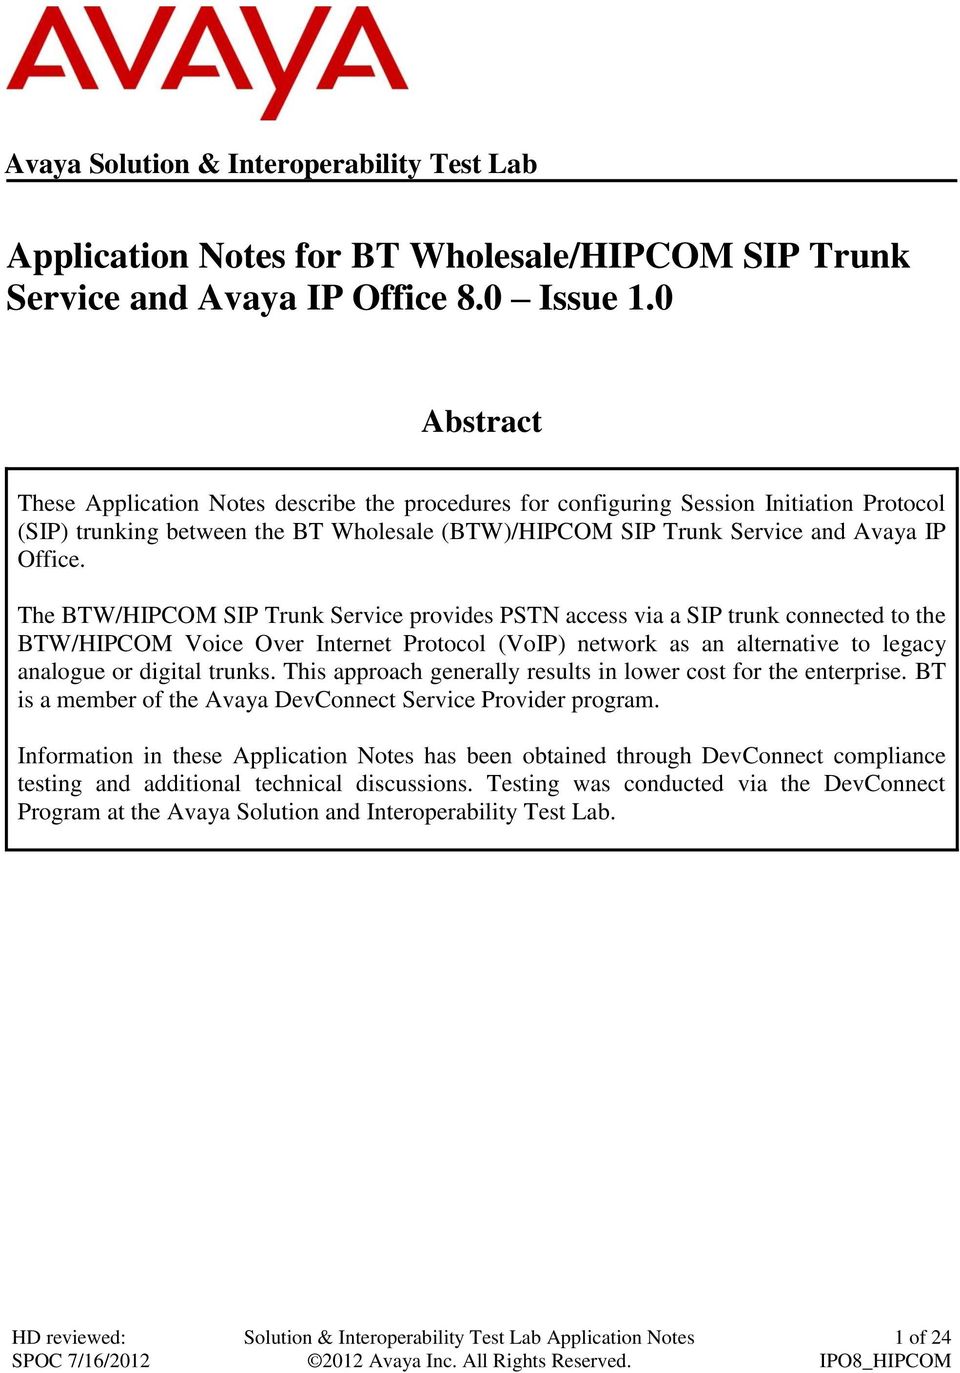 The BTW/HIPCOM SIP Trunk Service provides PSTN access via a SIP trunk connected to the BTW/HIPCOM Voice Over Internet Protocol (VoIP) network as an alternative to legacy analogue or digital trunks.